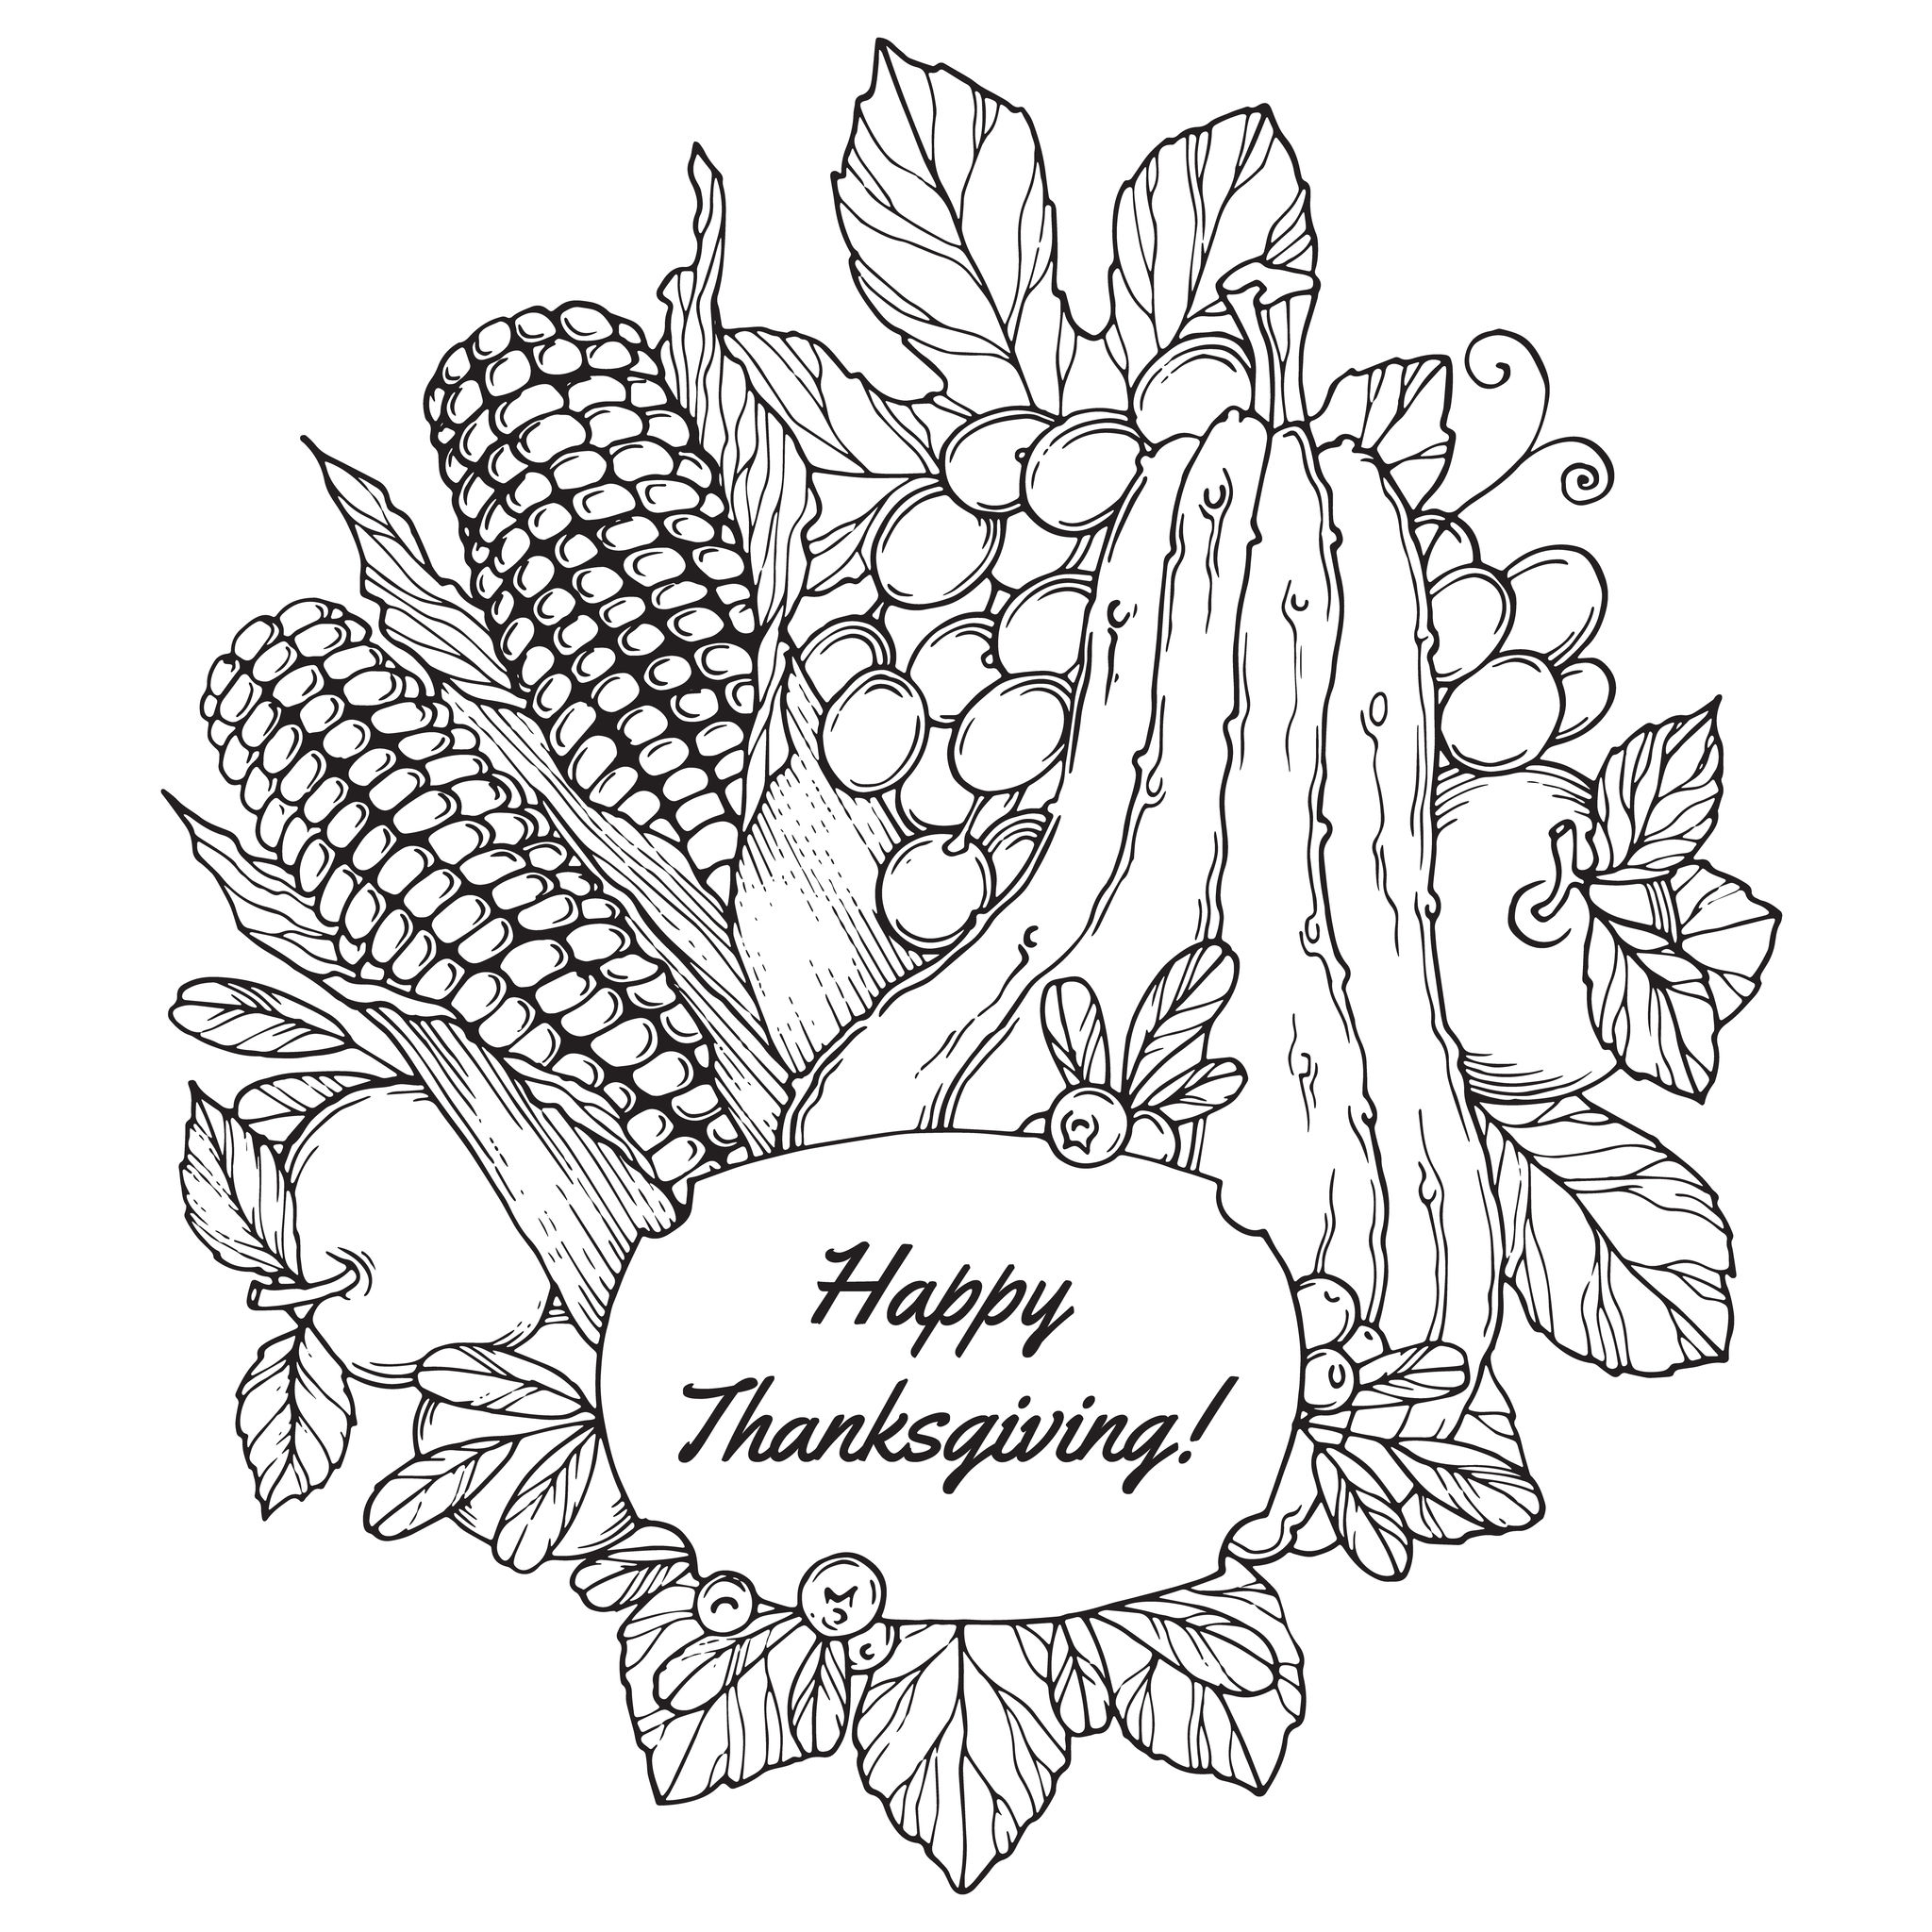 Thanksgiving corn and fruits by frauleinfreya